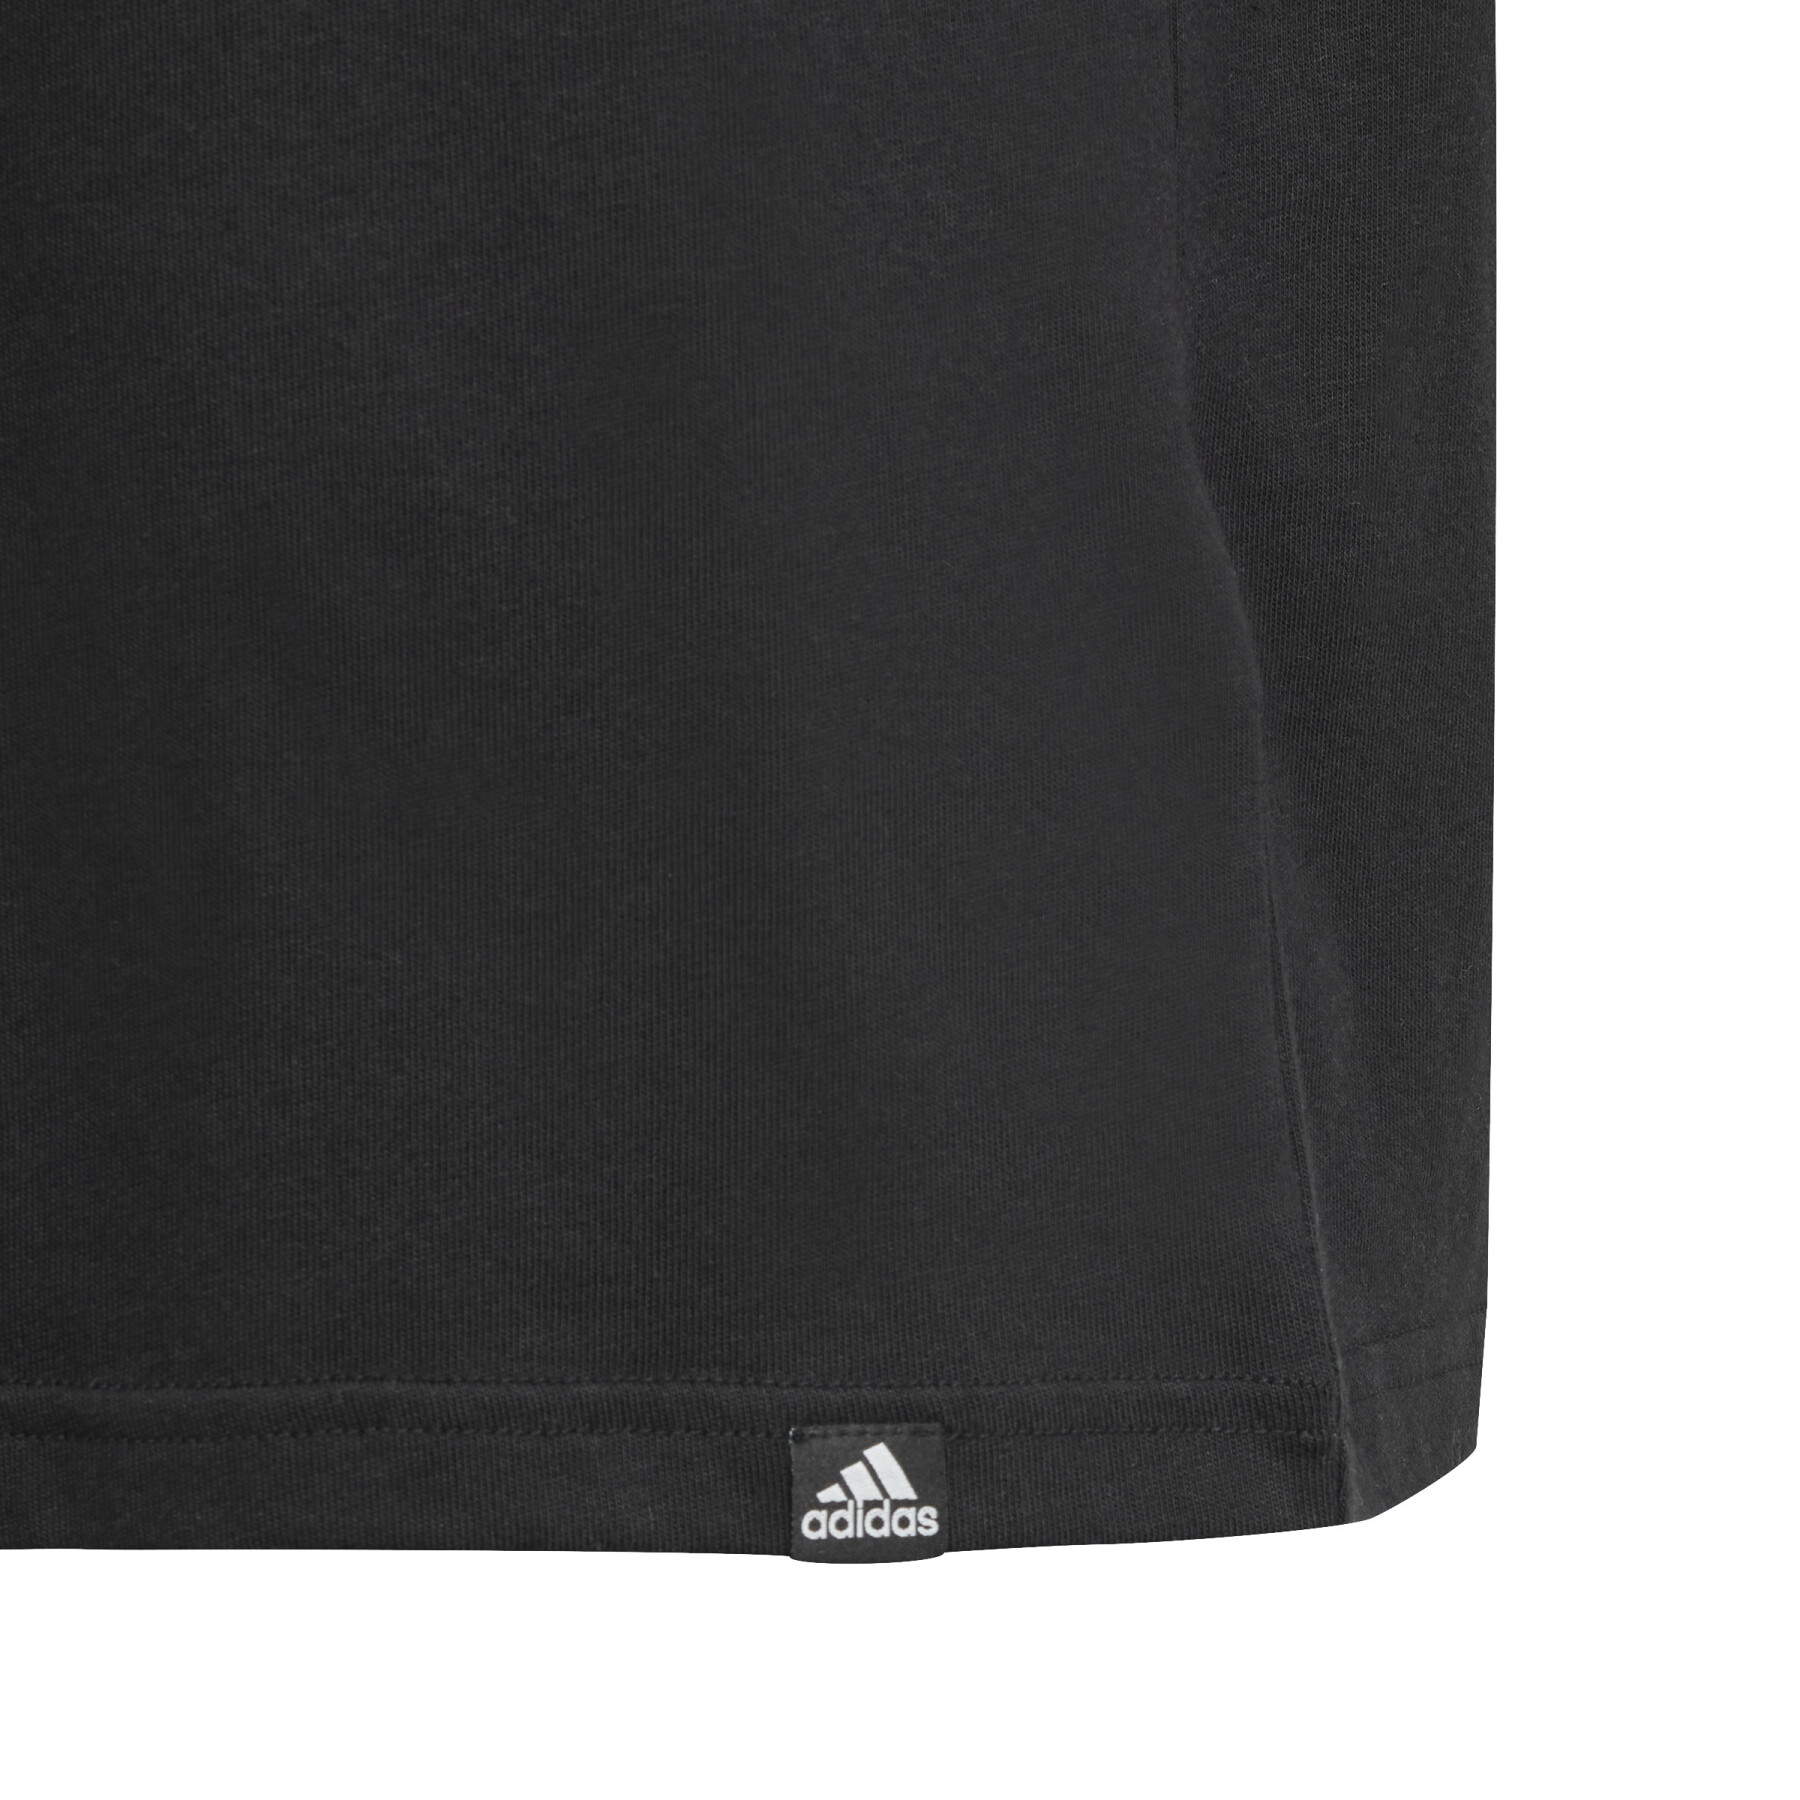 Child's T-shirt adidas Table Folded Graphic